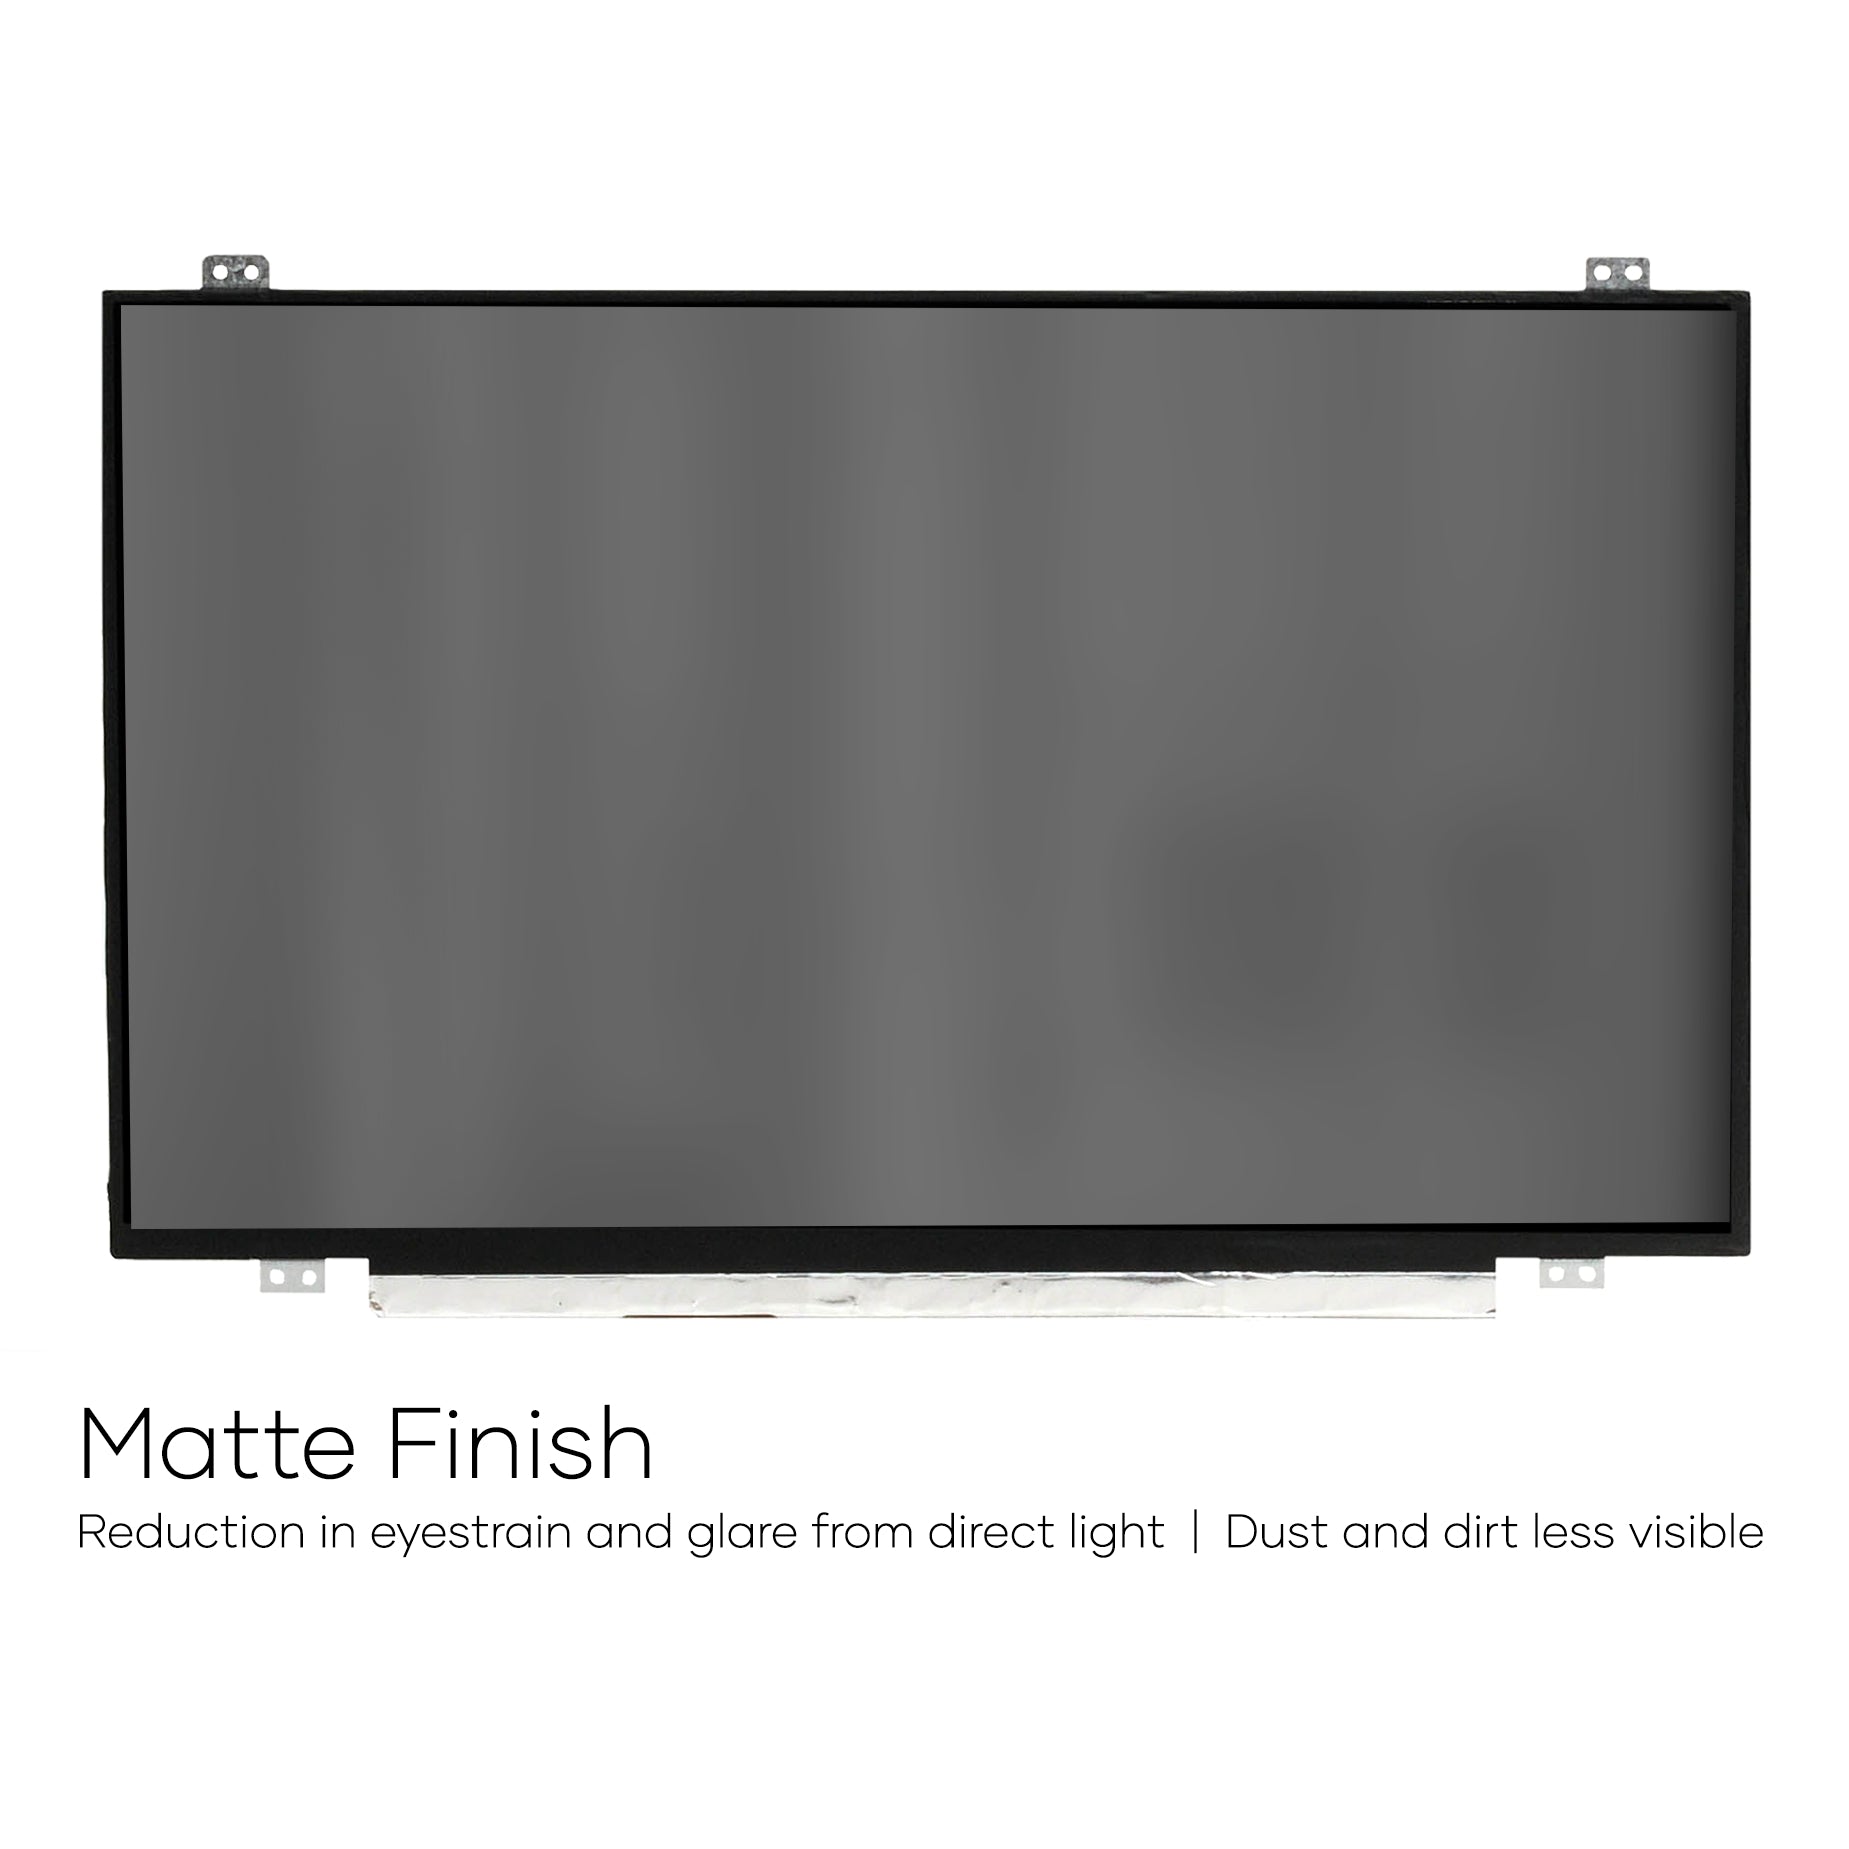 LCDBros Screen Replacement for NV156FHM-N42 FHD 1920x1080 IPS Matte LCD Display